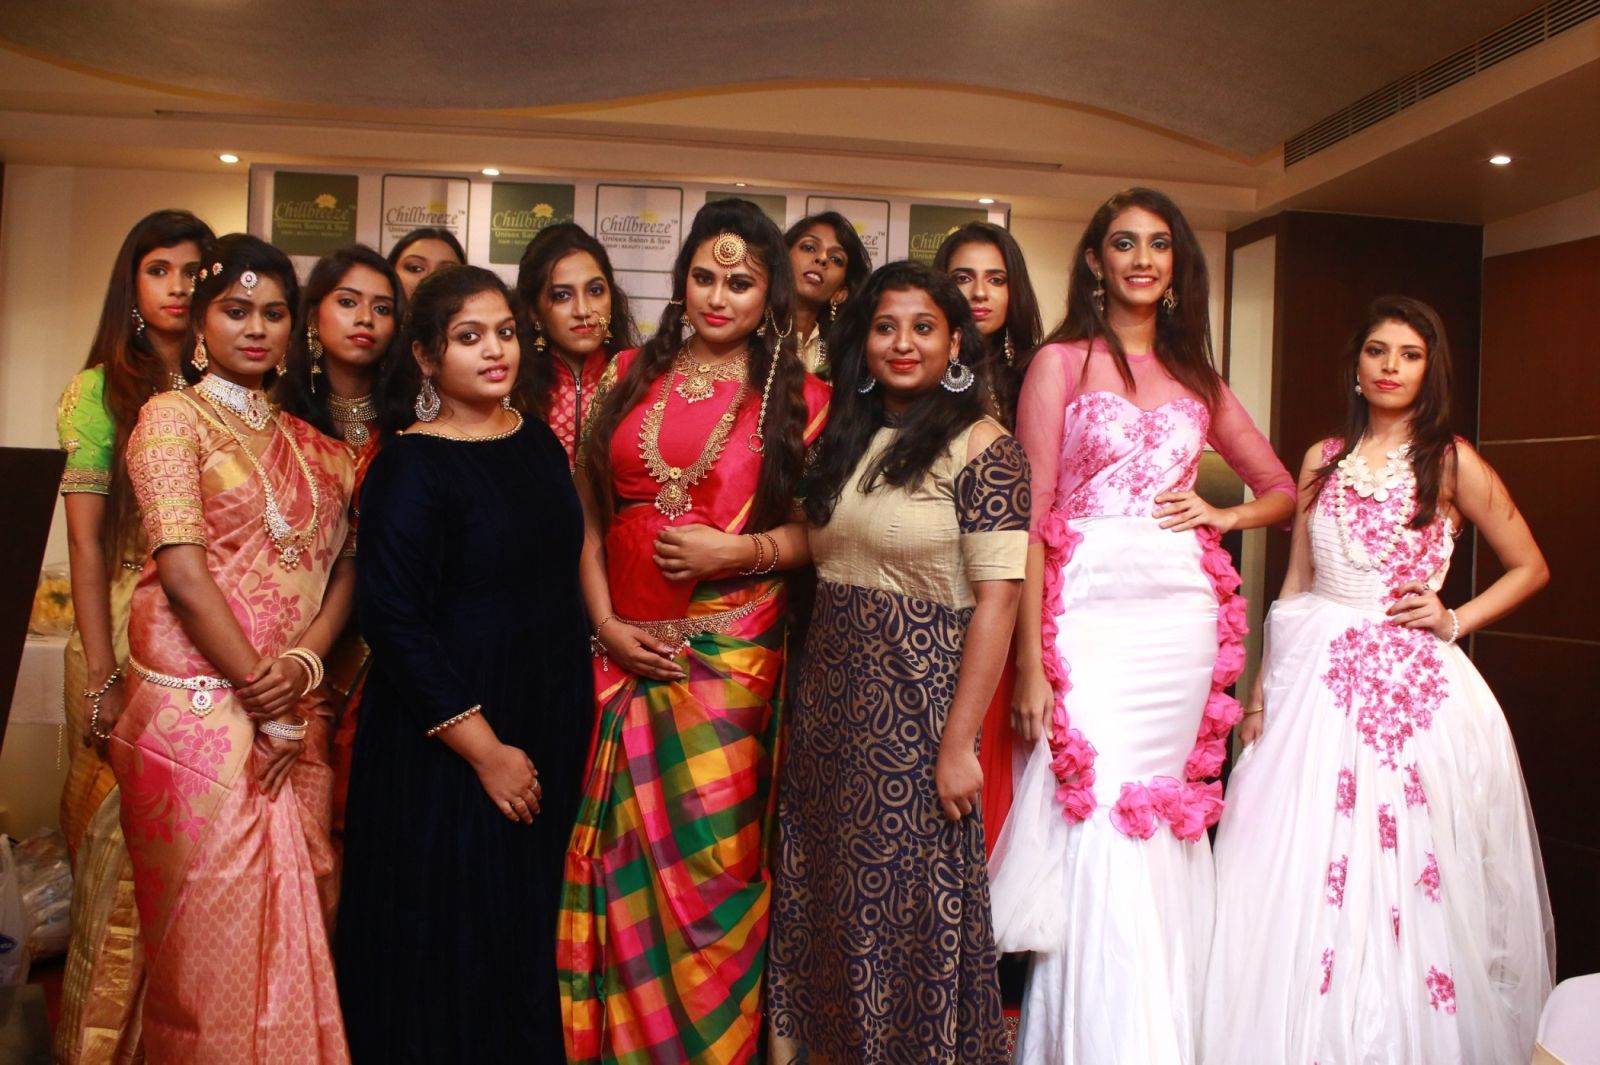 Celebrities at ChillBreeze Presents Indian Ethinic Fashion Show Photos (30)